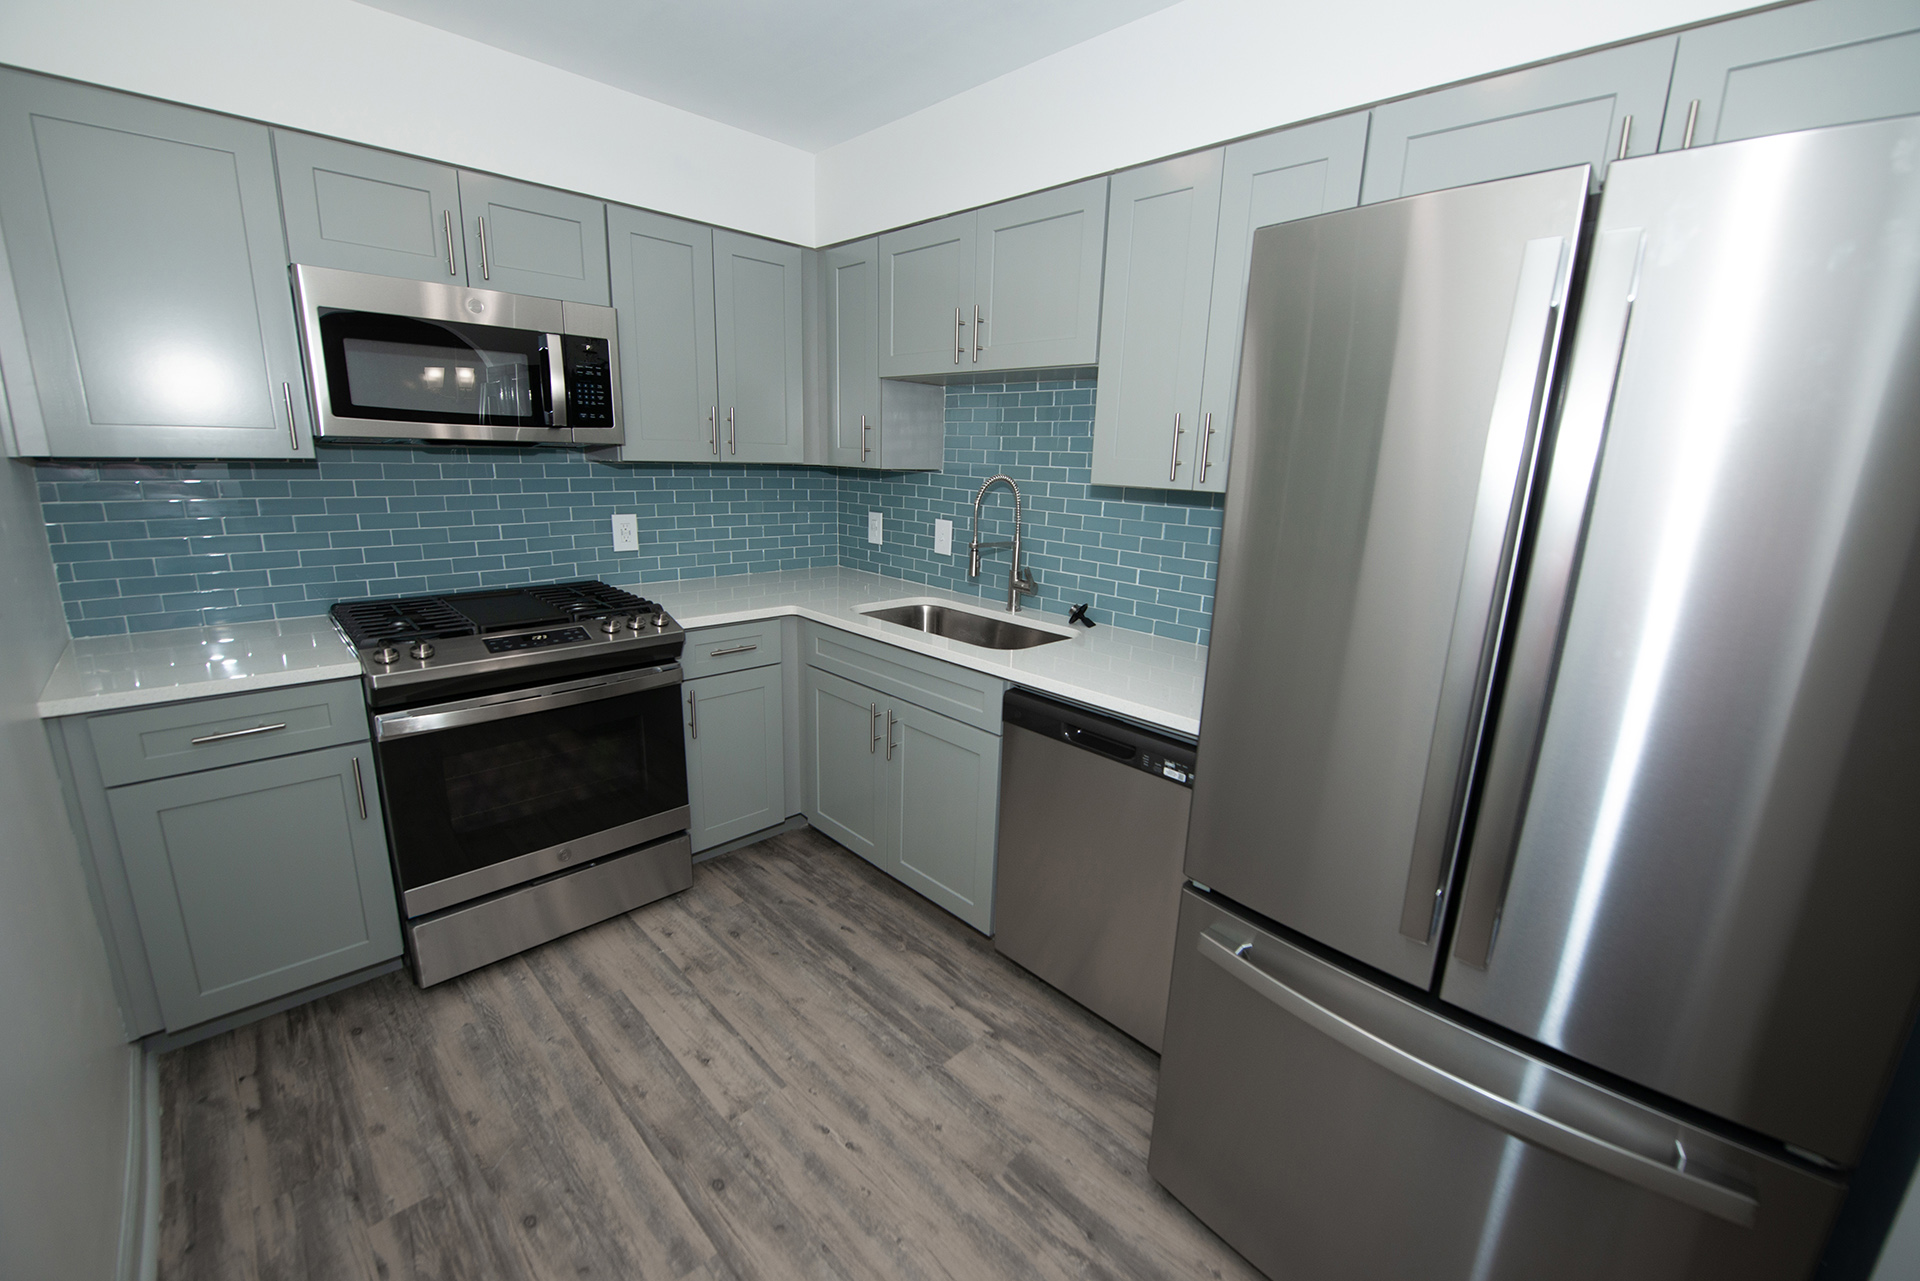 Fully Equipped Kitchen at Wildwood Ridge Apartments